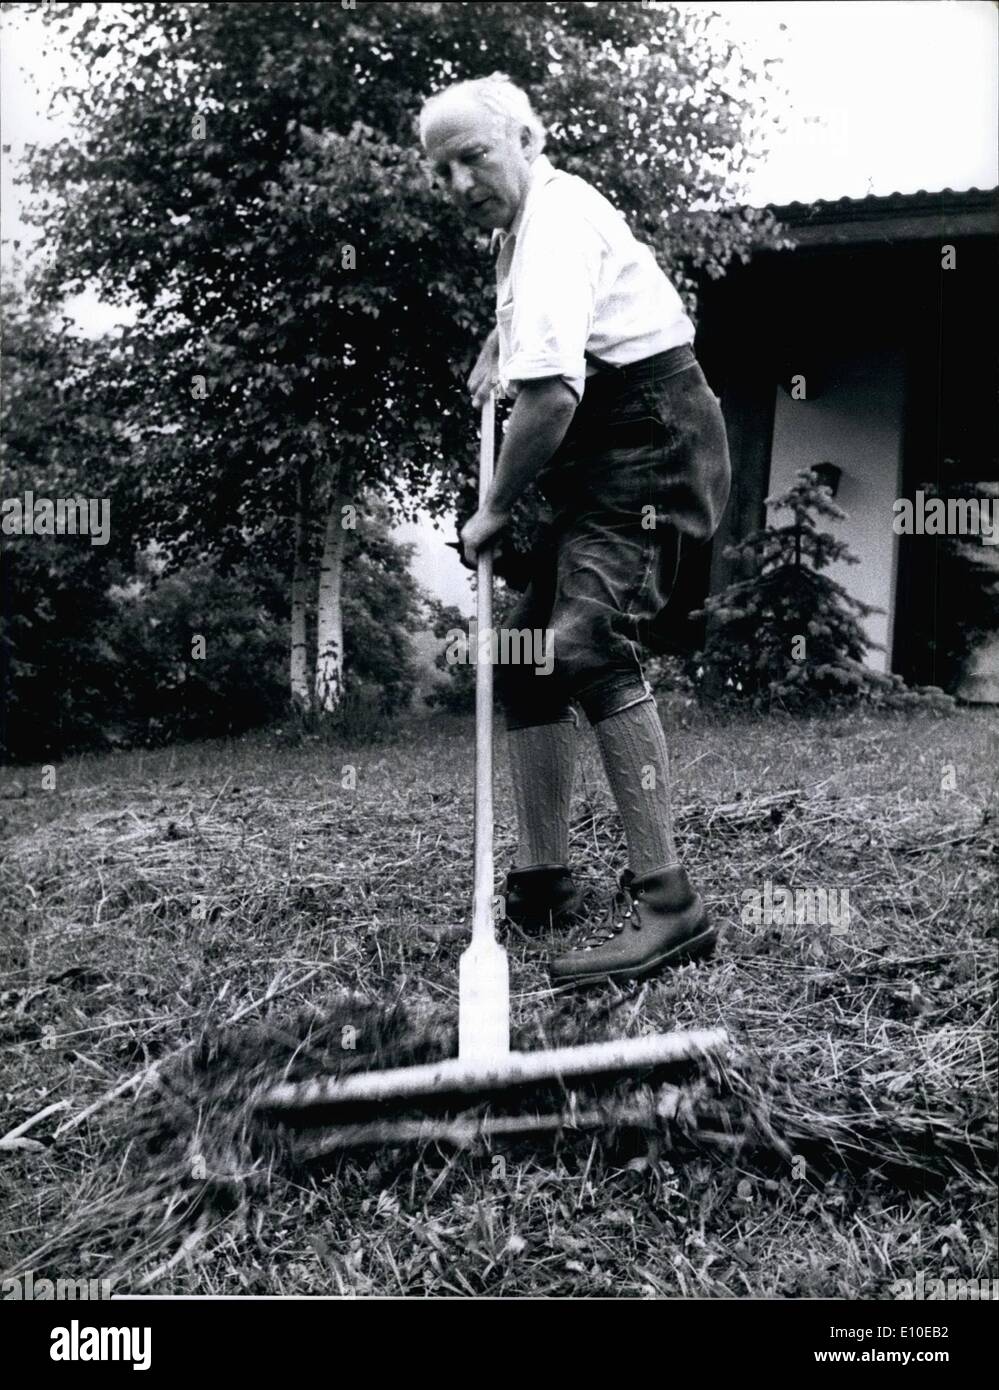 Aug. 08, 1972 - Walter Scheel, Minister of Foreign affairs, on Holiday in Austria.: At the ,moment nearly all members of the government are on summer holidays like Walter Scheel (Minister of Foreign Affairs). In his holiday home in the Austrian Hinte thal, Walter Scheel devotes himself to his family and to the garden, which he cultivates all by himself. Even here he doesn't remain indisturbed, as friends of his party and collengues - not to talk of journalists and photographers are visiting him Stock Photo